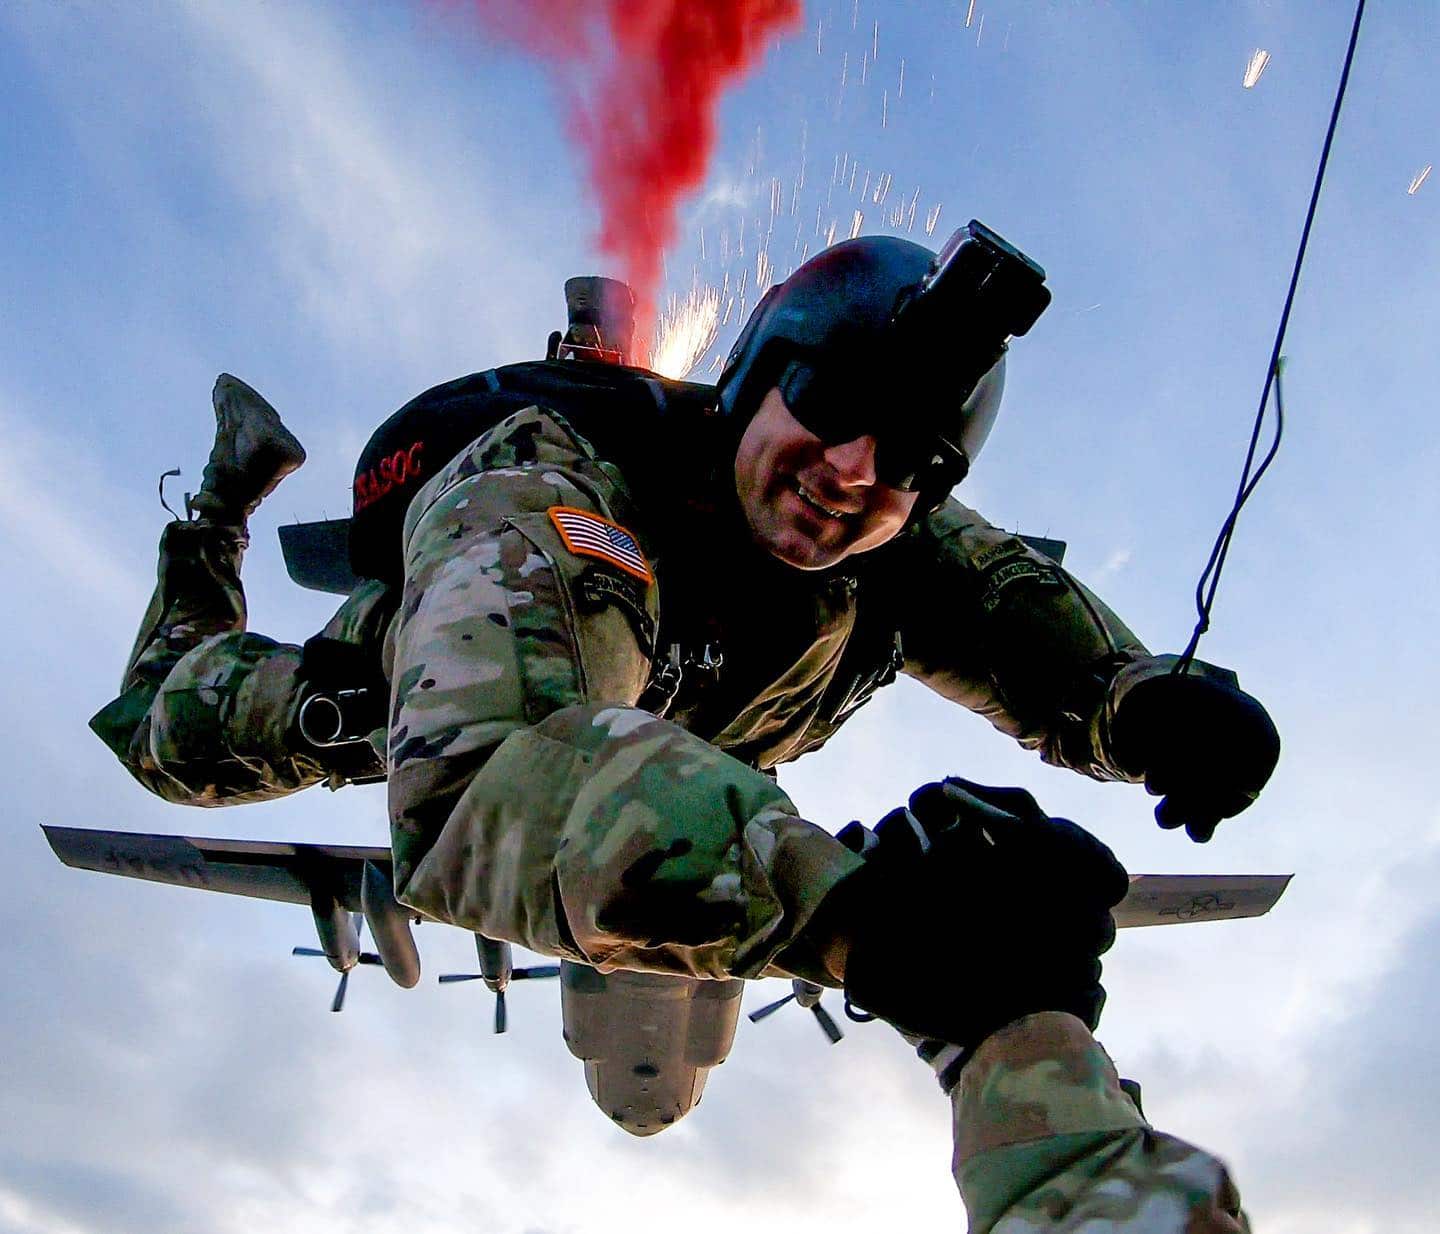 90277117 2809903309057075 3365070644071890944 o RESCHEDULED: U.S. Army Special Ops skydive into Birmingham to honor healthcare workers + where to see them